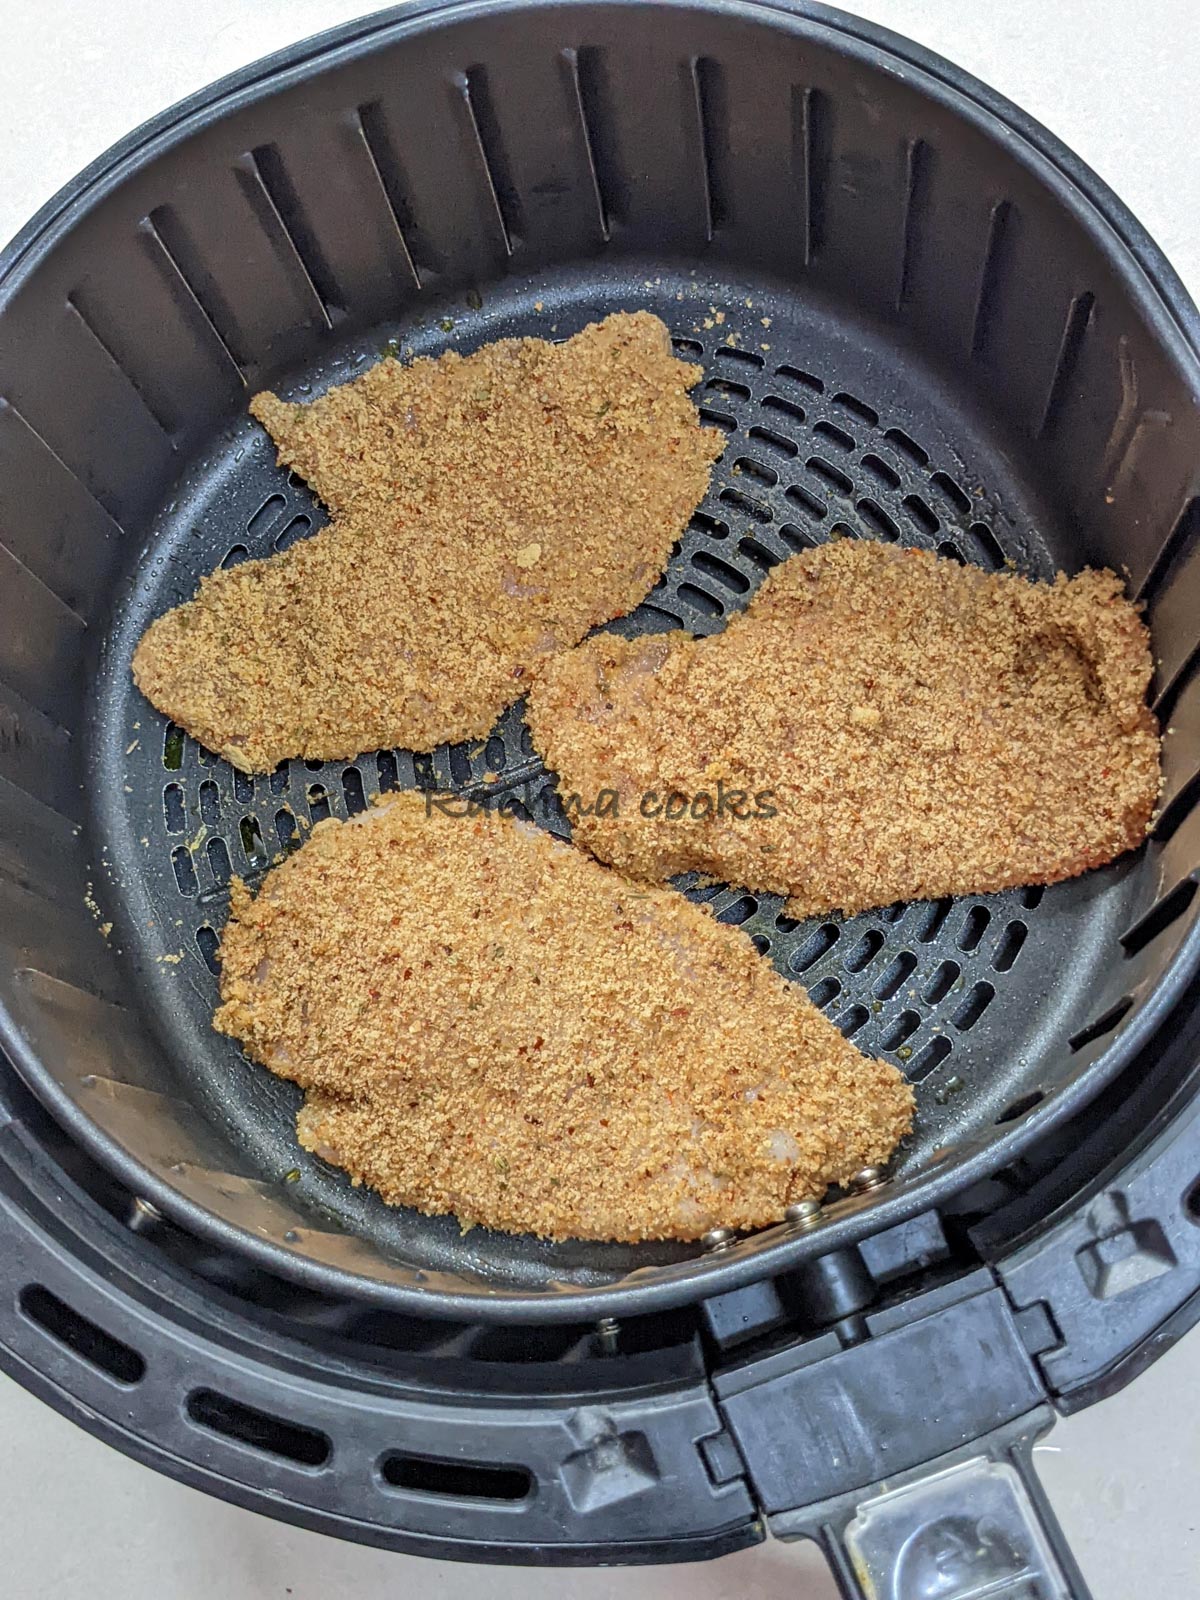 Three breaded chicken breast cutlets ready for air frying in air fryer basket.